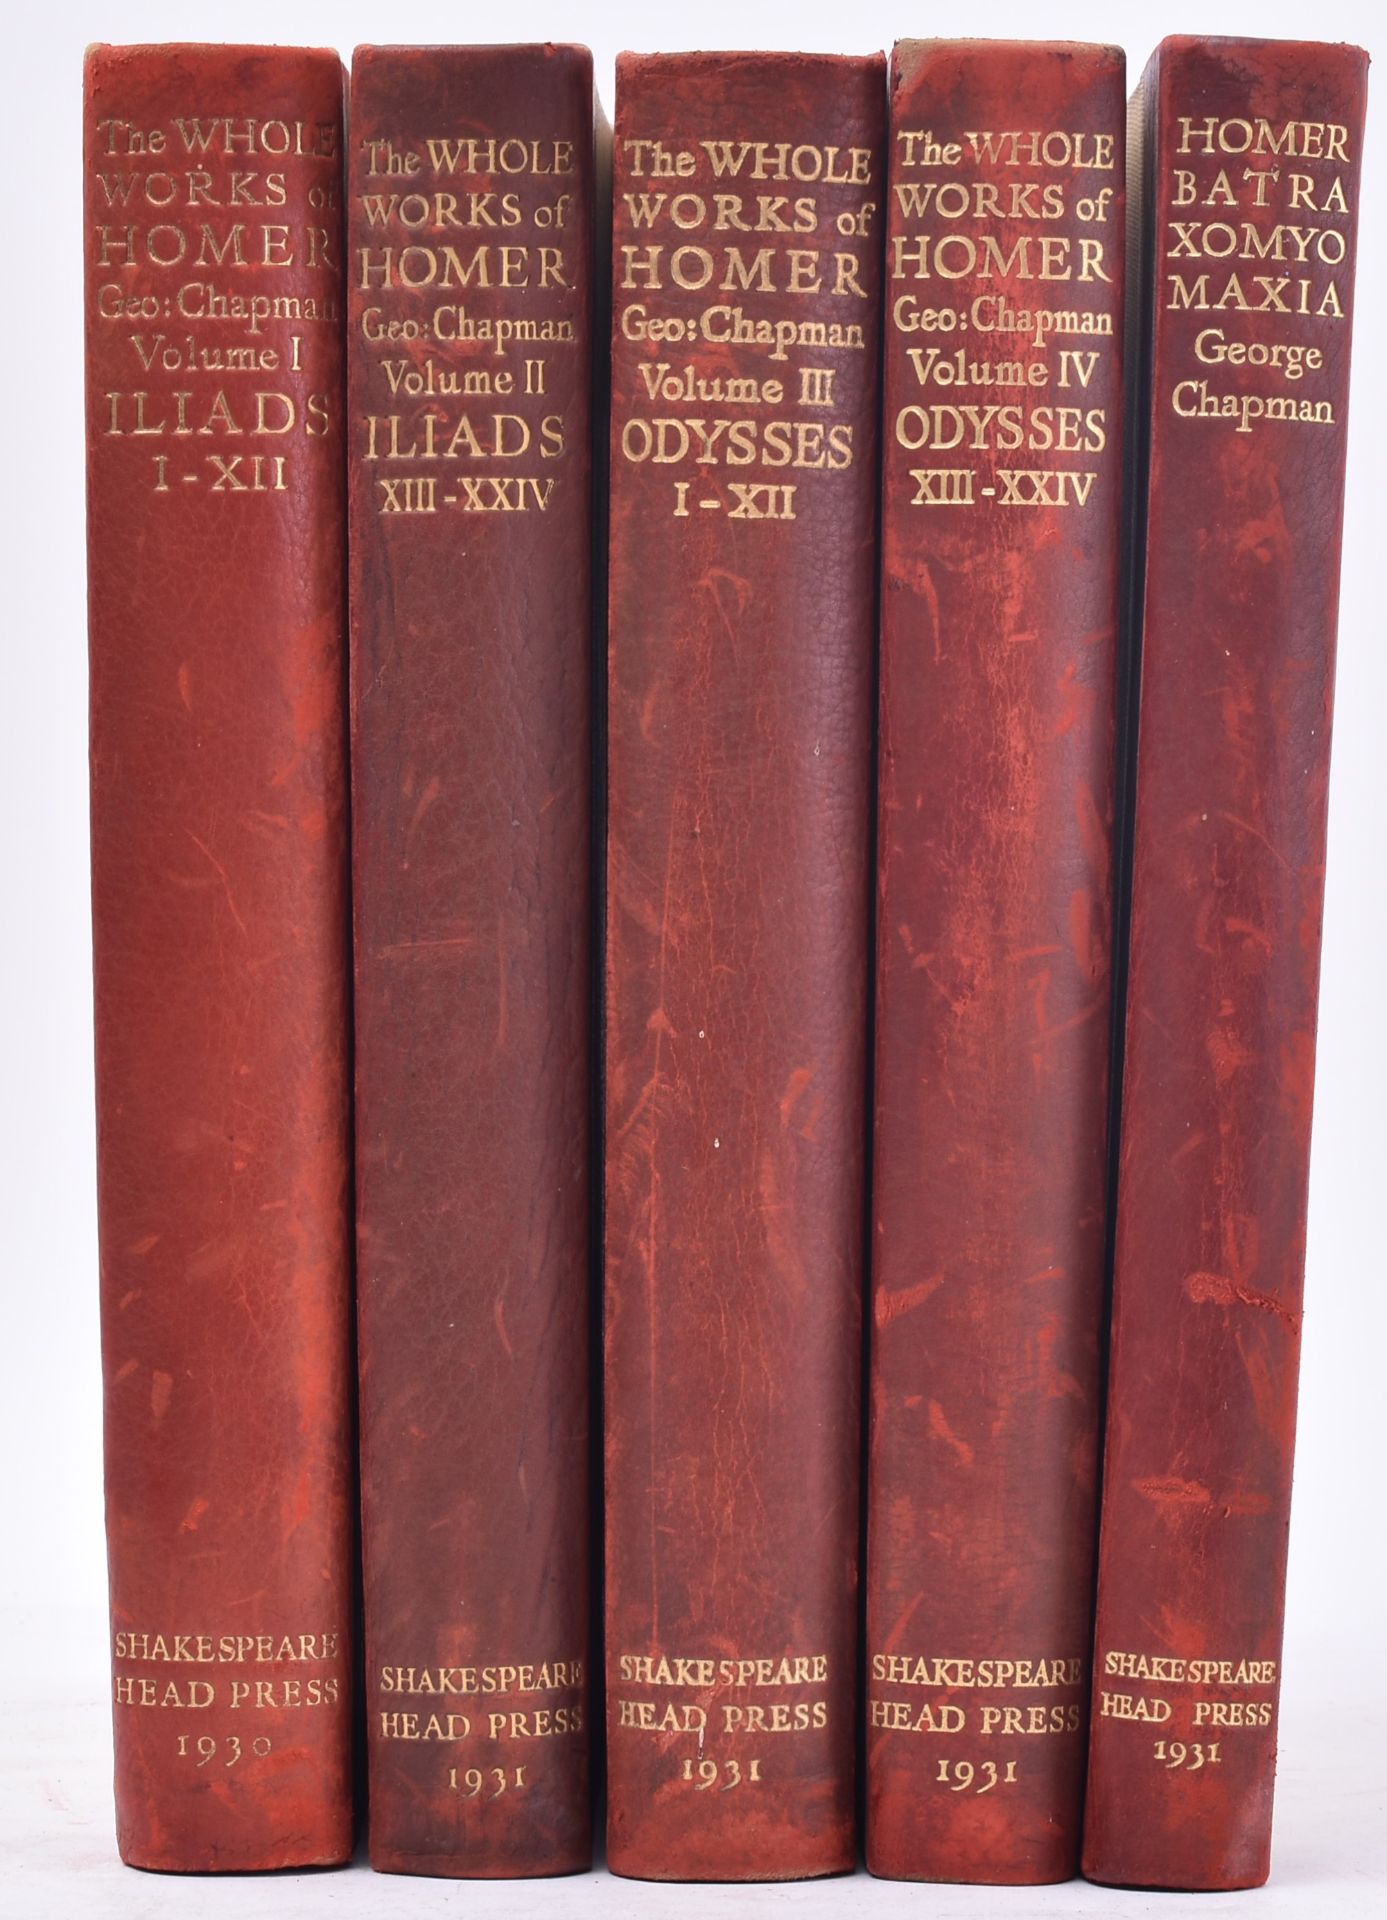 1930 - WORKS OF HOMER IN FIVE VOLUMES - SHAKESPEARE HEAD